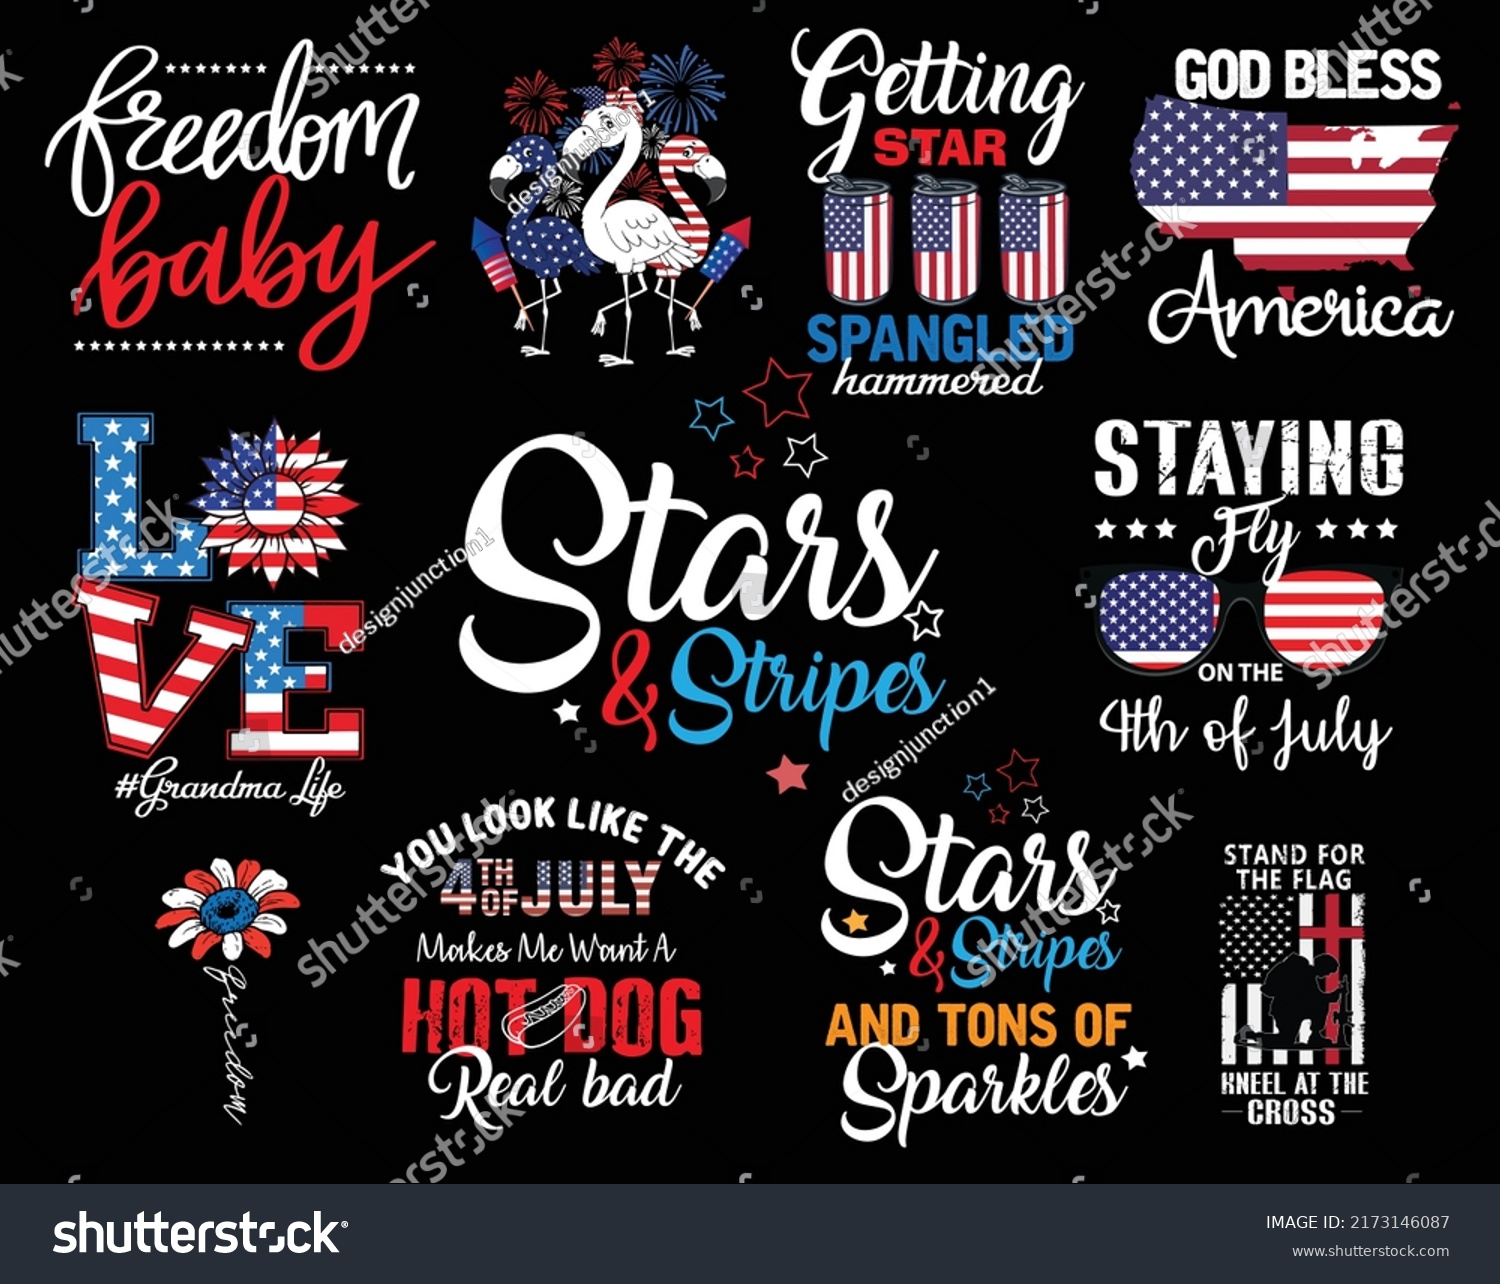 SVG of 4th of July SVG T shirt Design Bundle. Freedom baby, God bless America. Love Grandma life. Stand for the flag kneel at the cross. svg